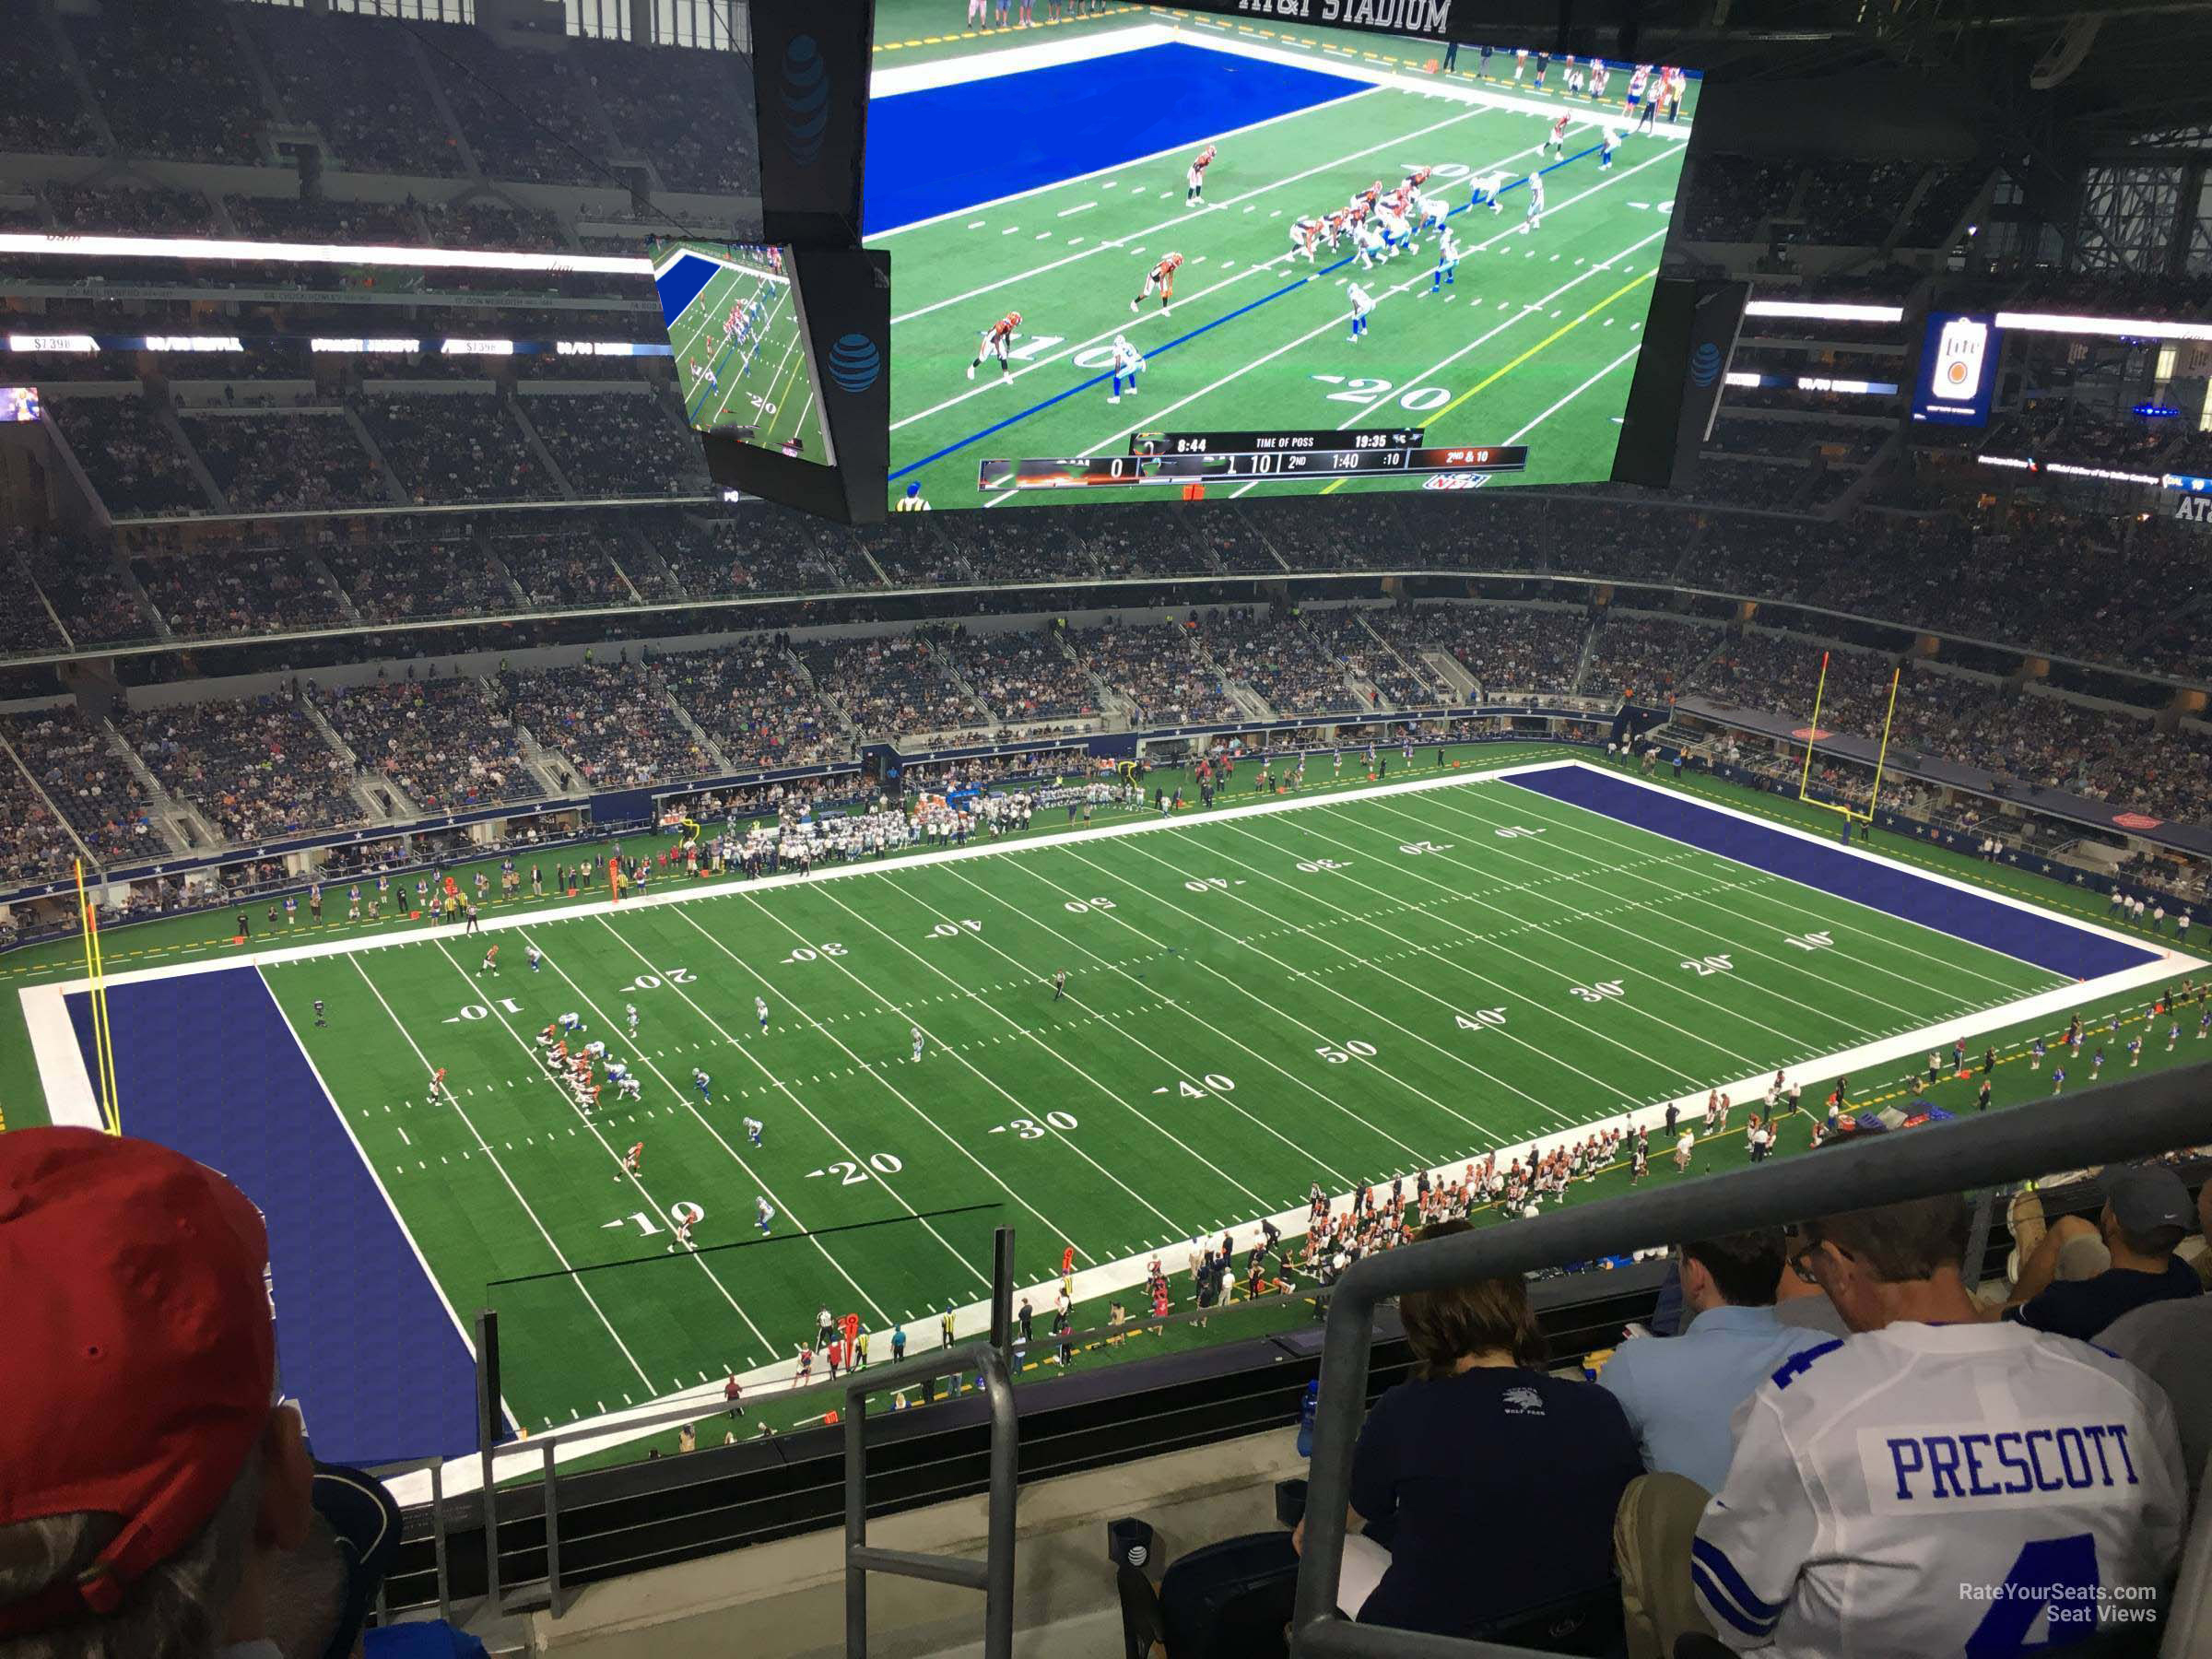 section 450, row 4 seat view  for football - at&t stadium (cowboys stadium)